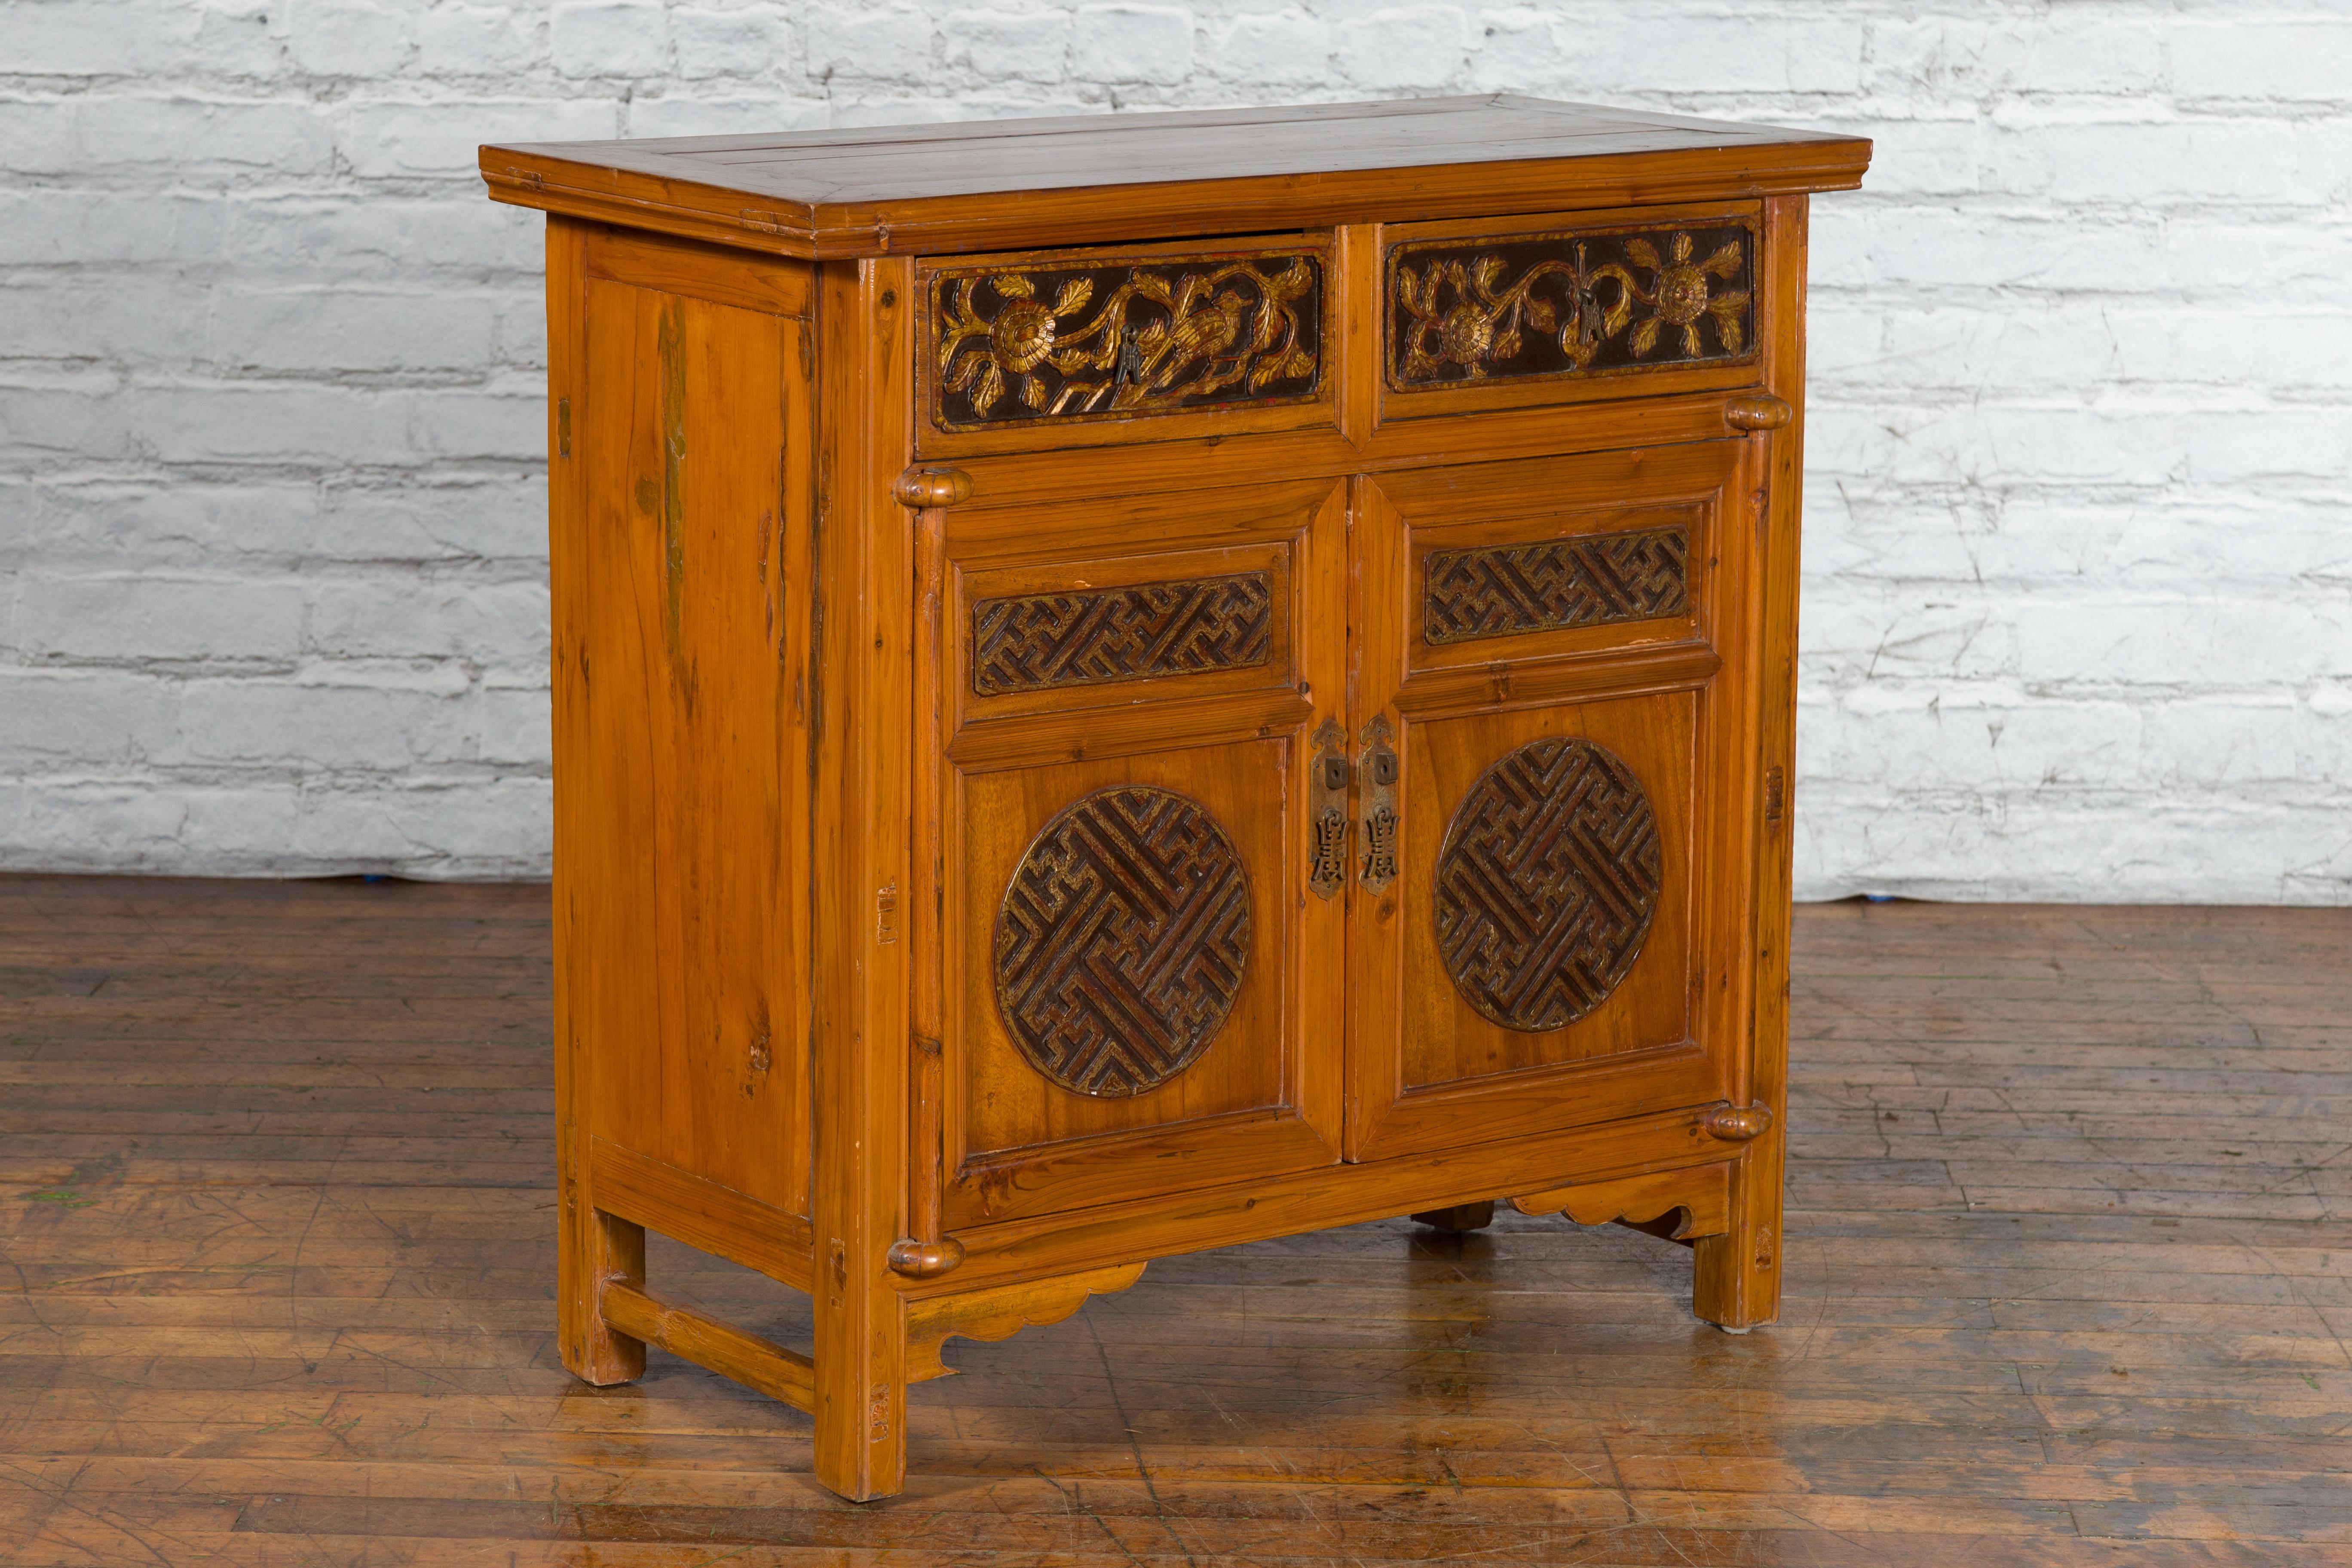 Gilt Chinese Qing Dynasty 19th Century Side Cabinet with Fretwork and Carved Drawers